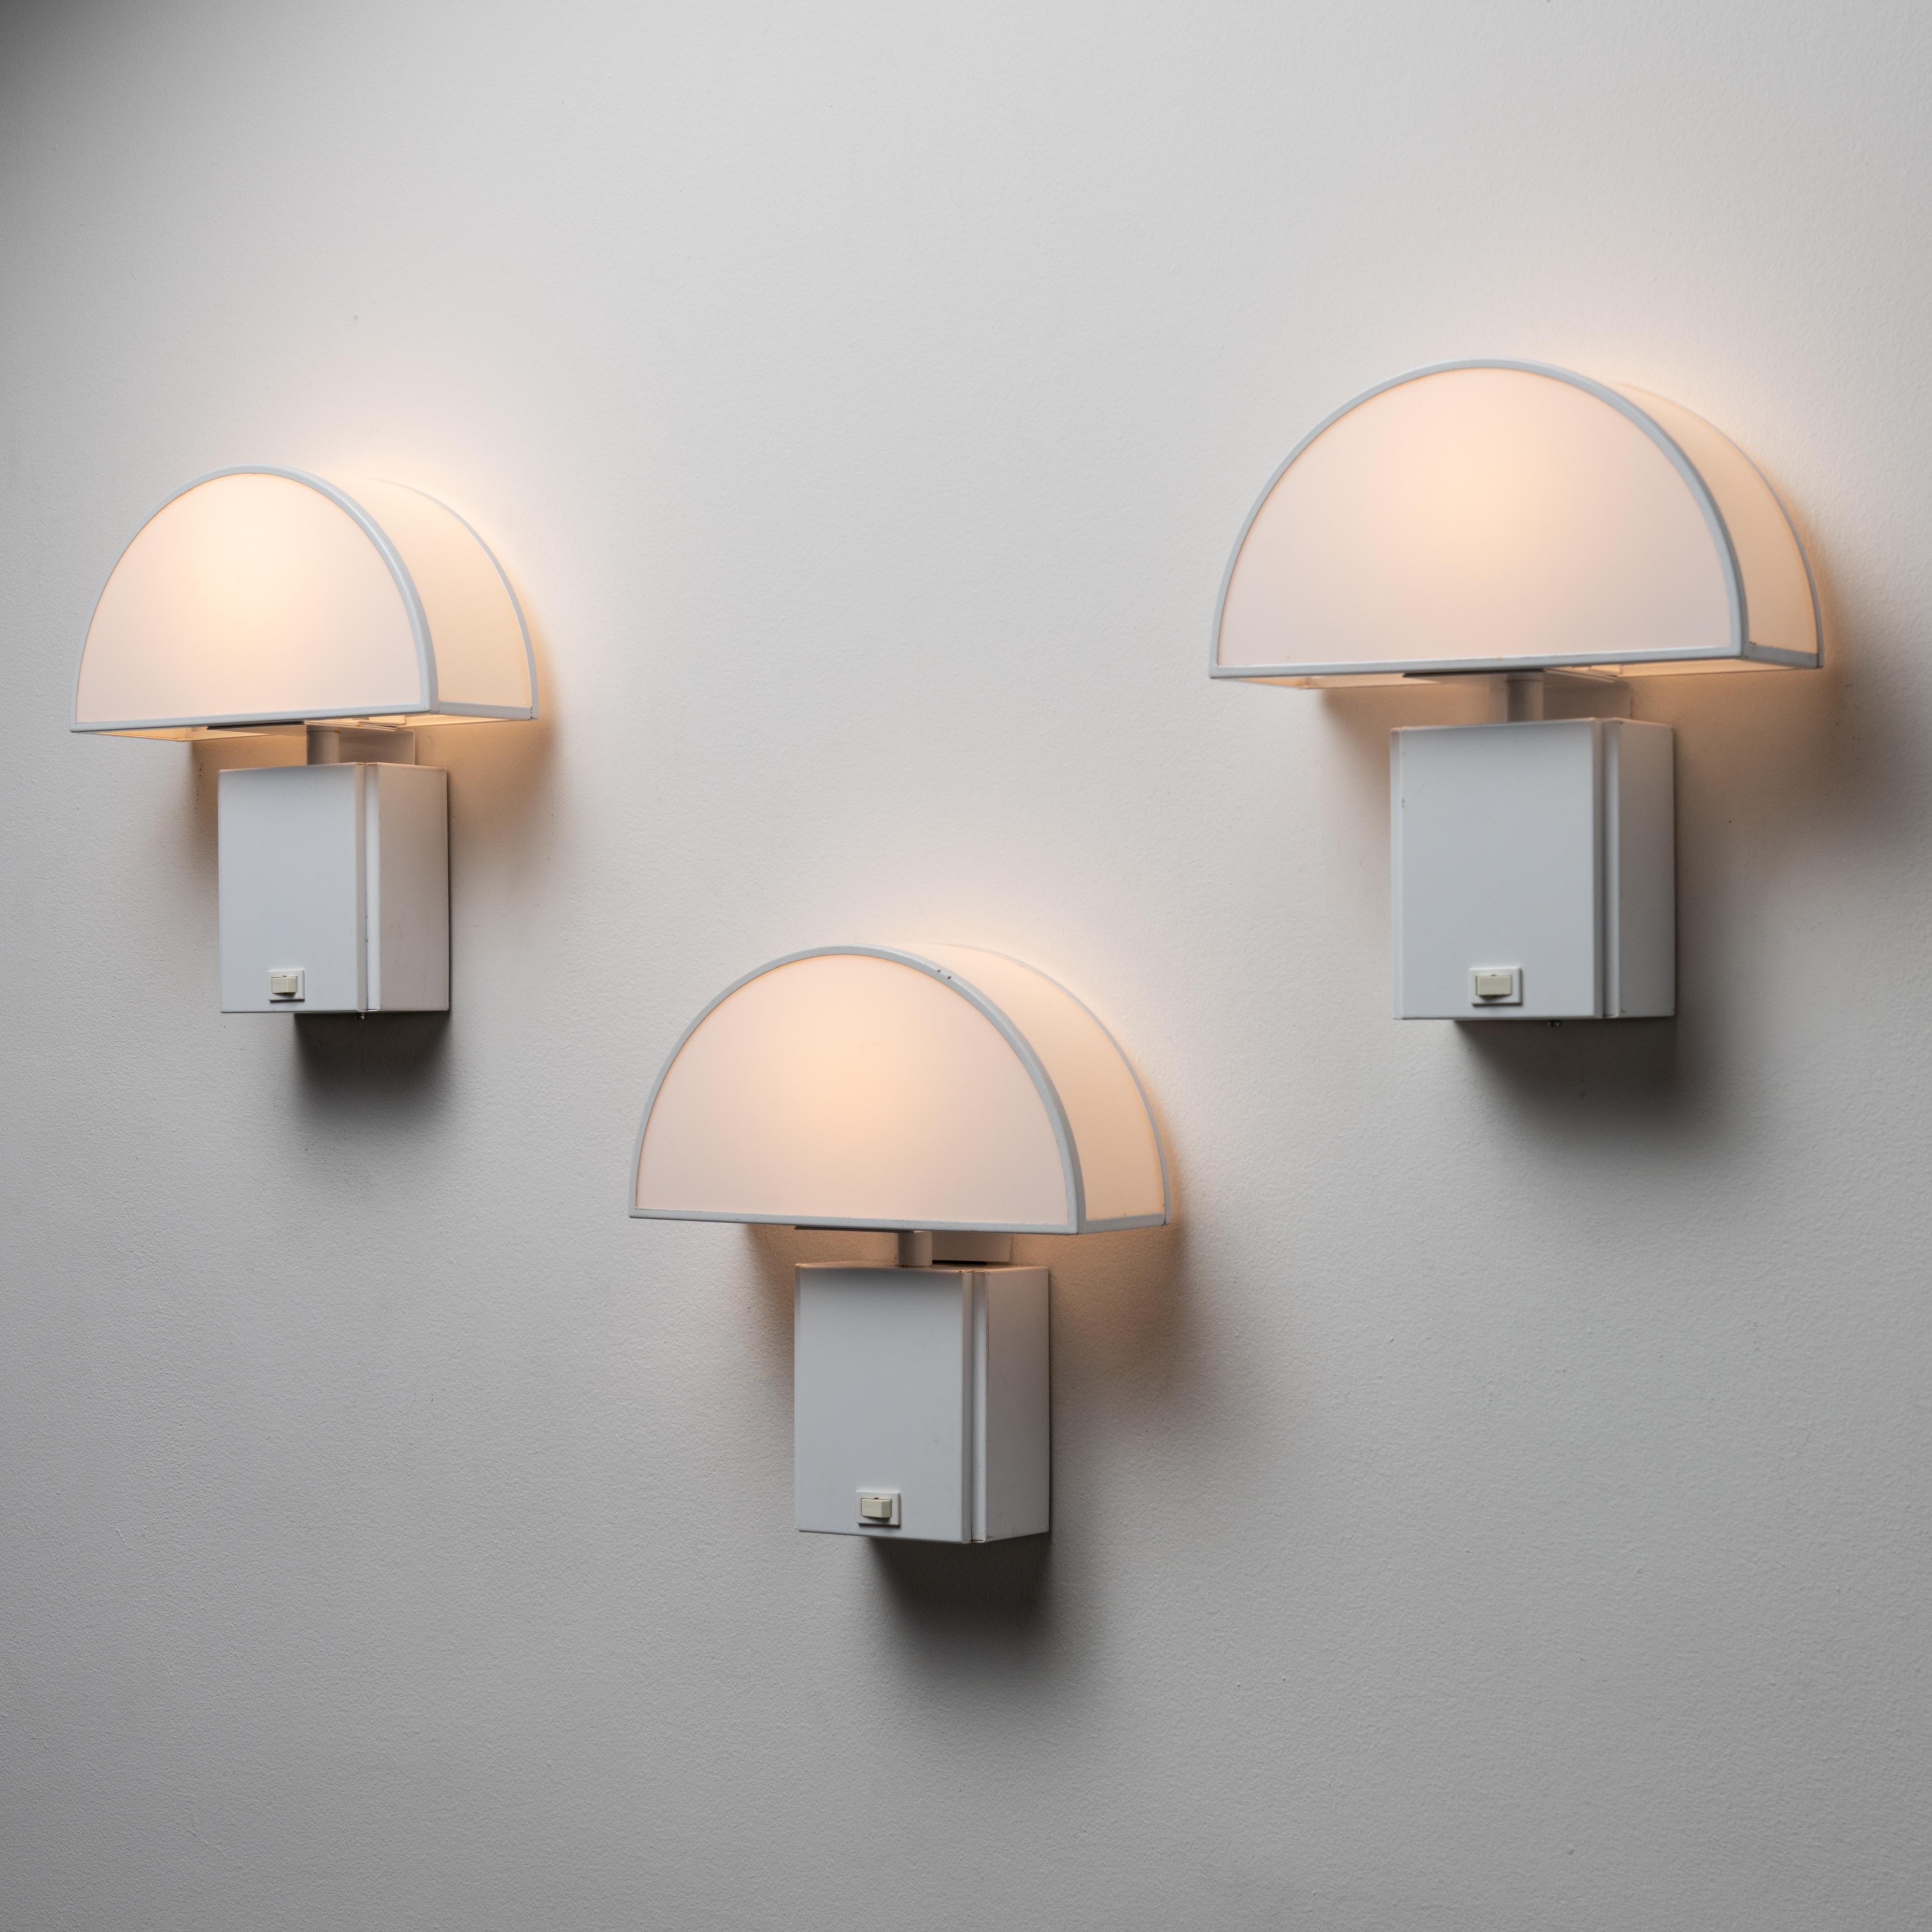 'Olympe' Sconces by Harvey Guzzini for ED. The 'Olympe' sconces feature a compact and rectangular body, with visible power switch on the center of the base along with a rounded umbrella-like shade that is framed in metal and diffused through acrylic